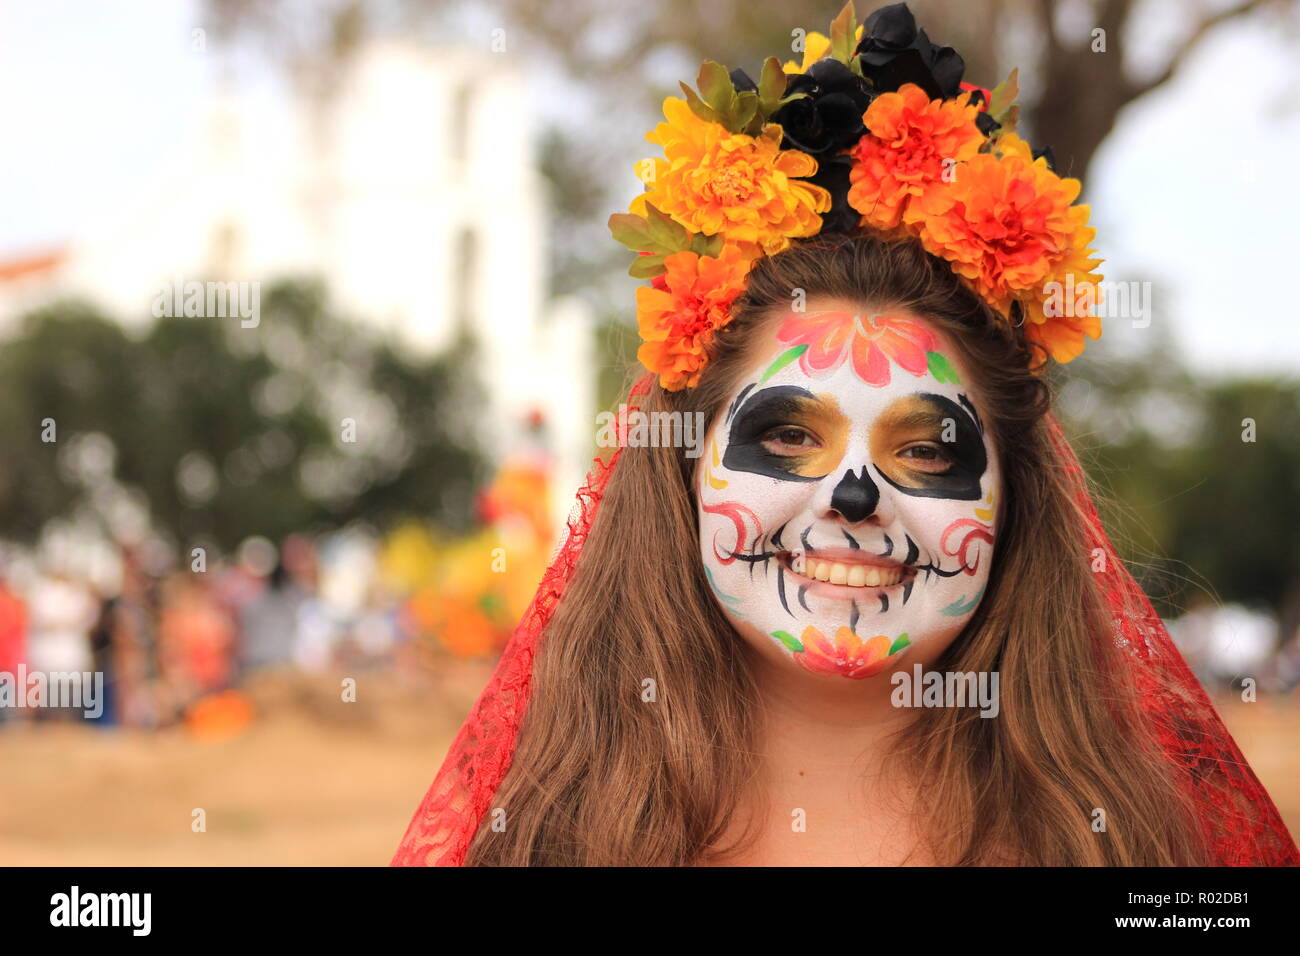 Woman with beautiful sugar skull makeup (Catrina) during Day of the Dead celebration (Dia de los Muertos) Stock Photo